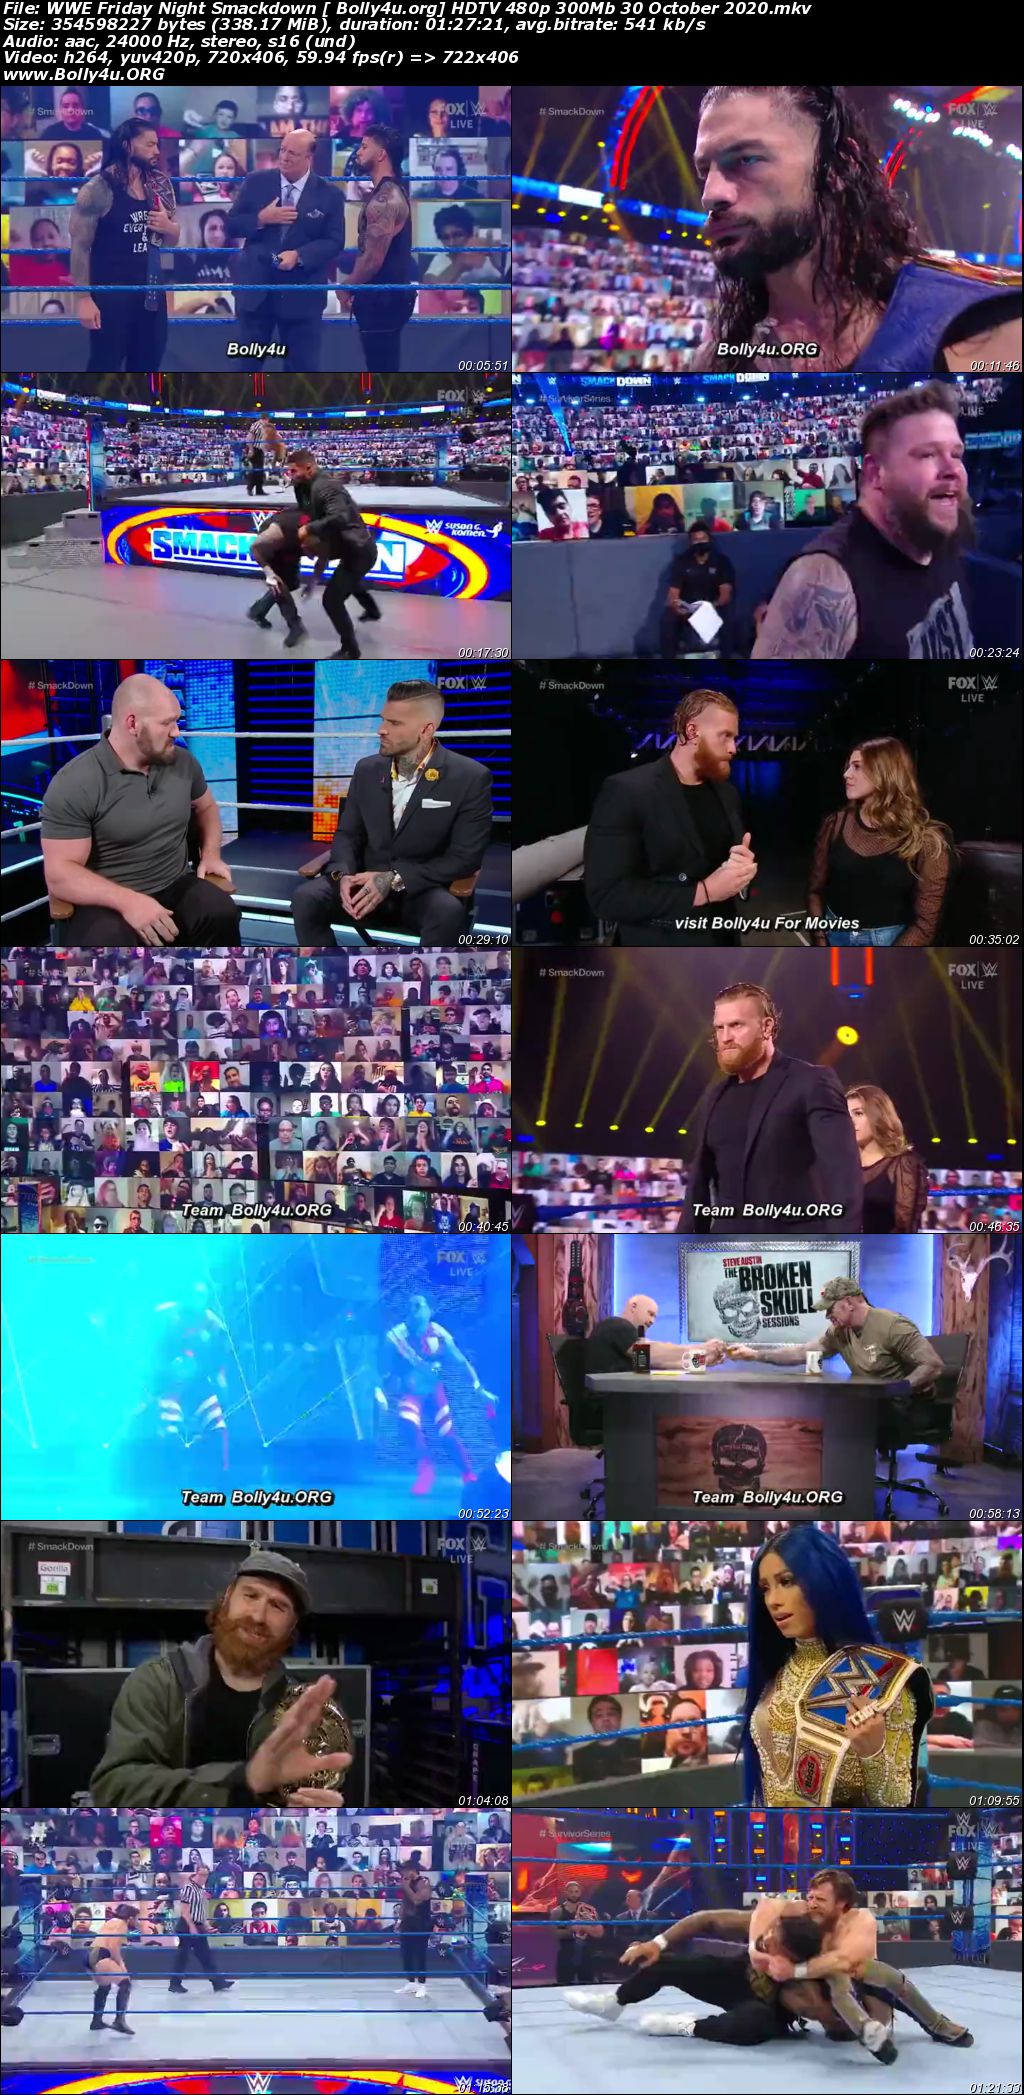 WWE Friday Night Smackdown HDTV 480p 300Mb 30 October 2020 Download